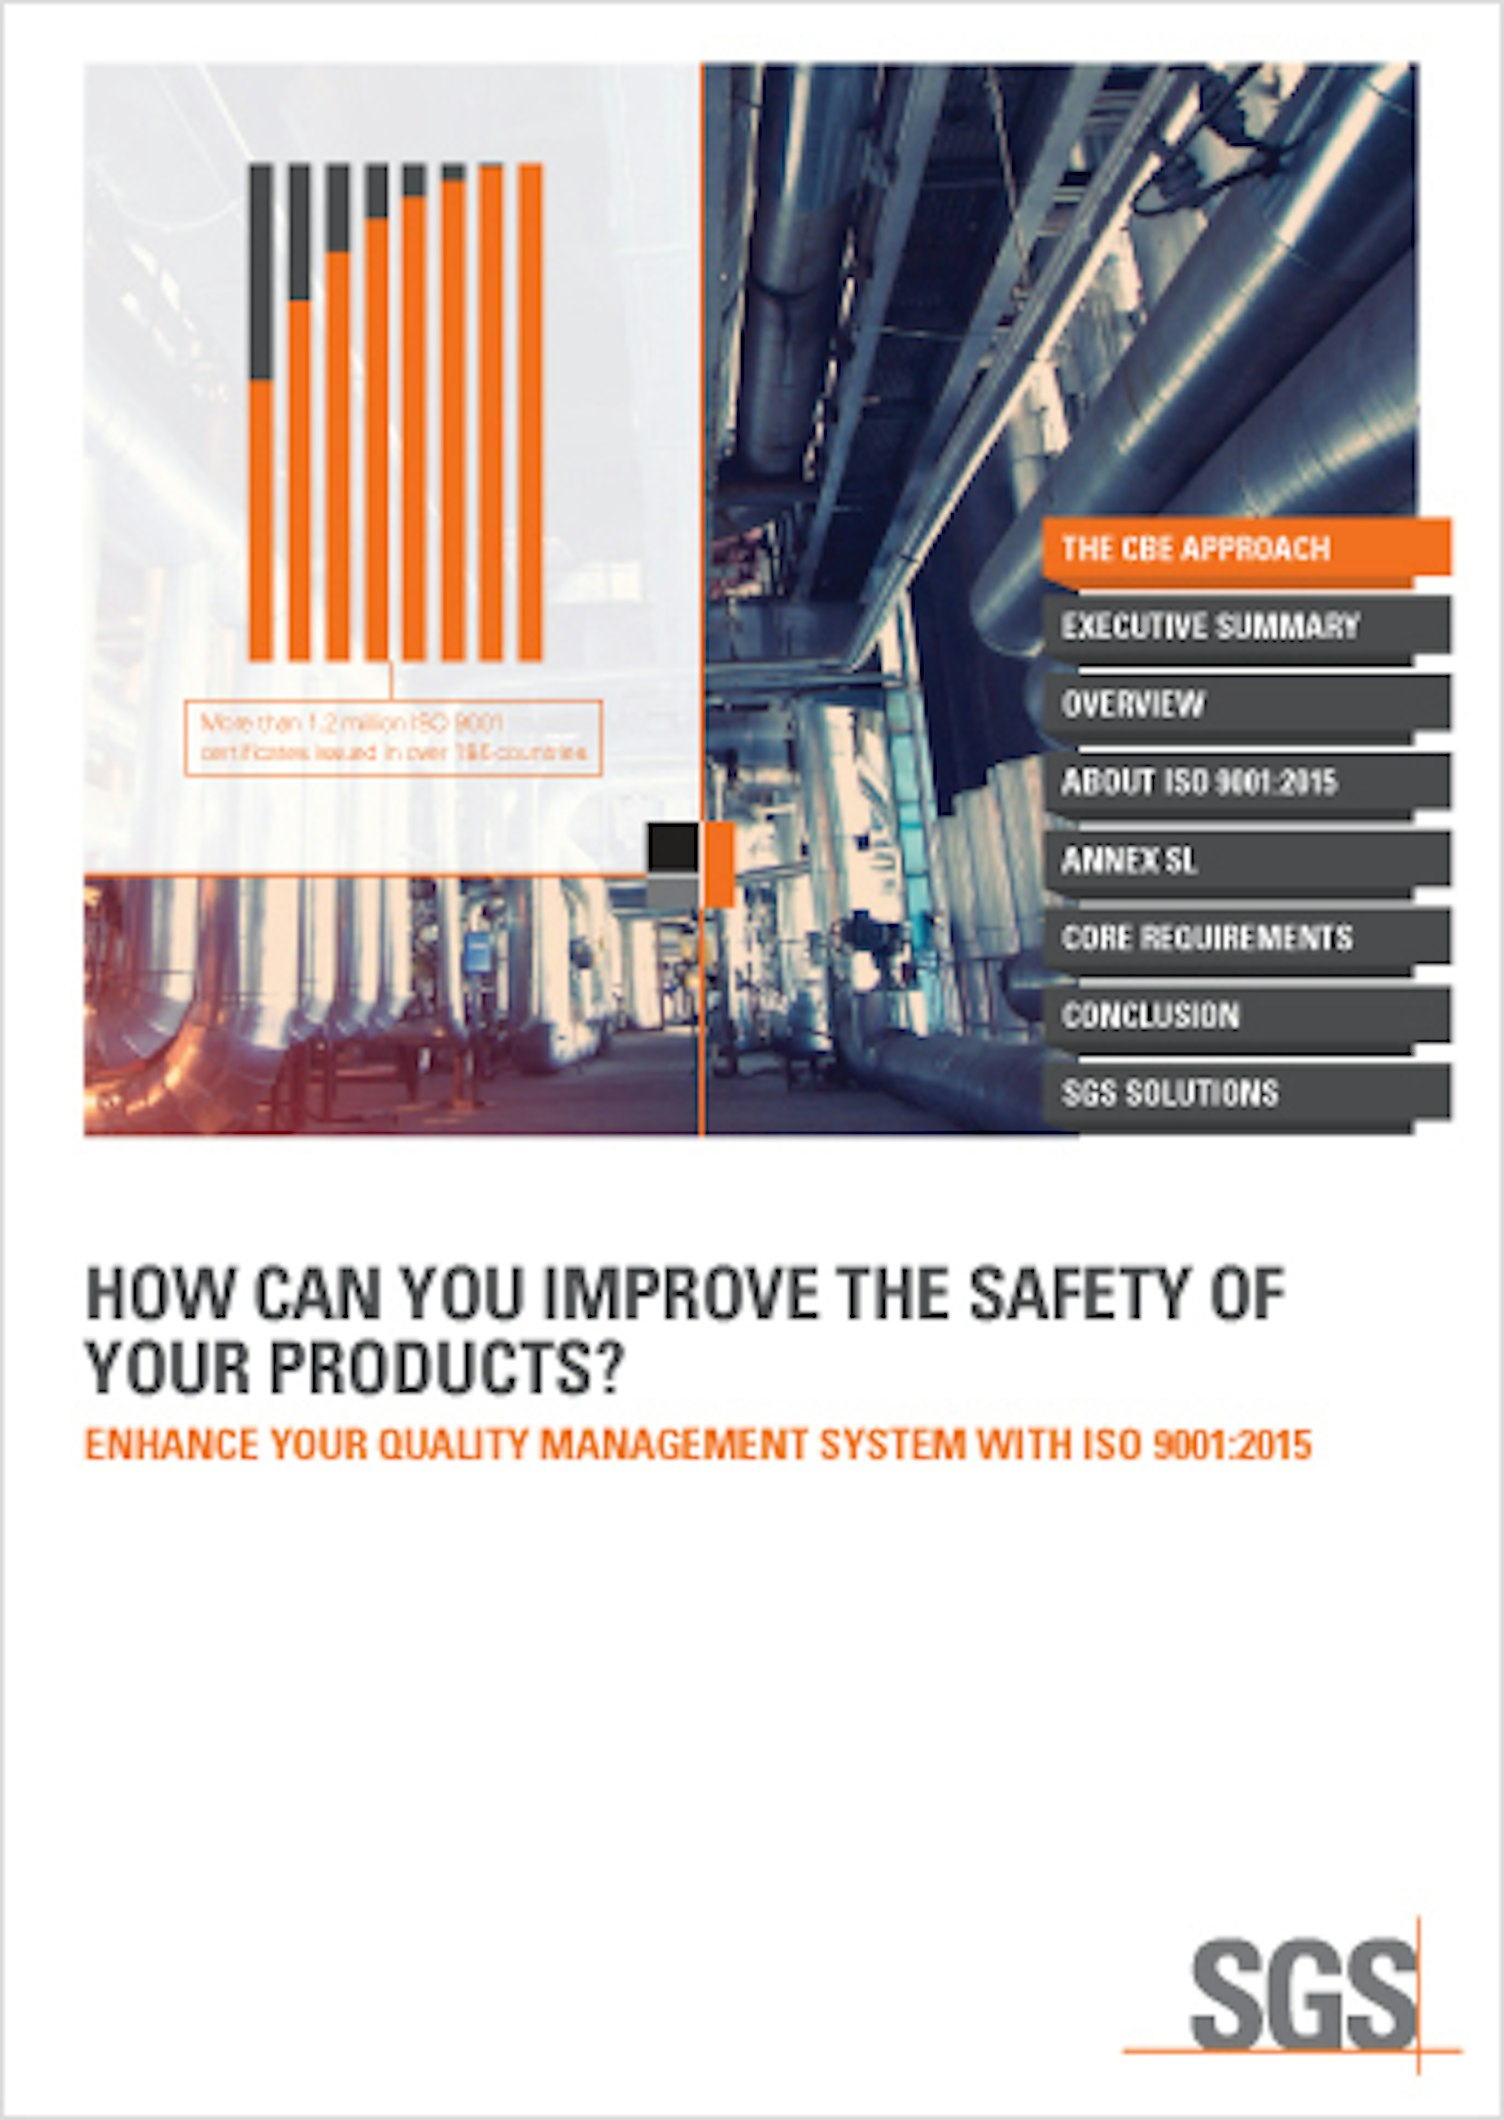 How you can Improve Product Safety